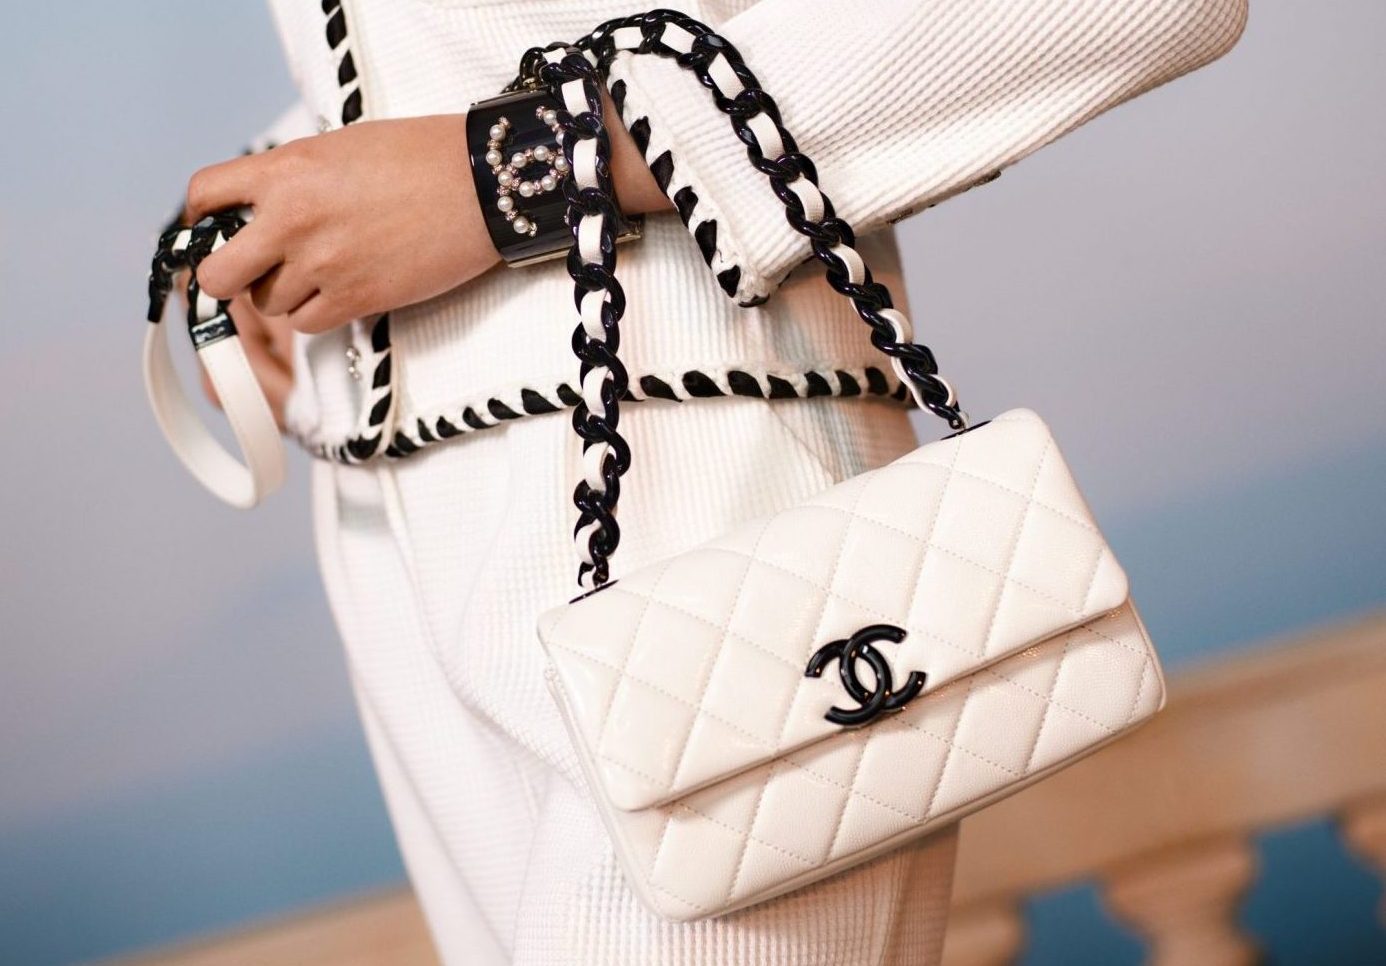 How Much Is A Chanel Bag? An Overview